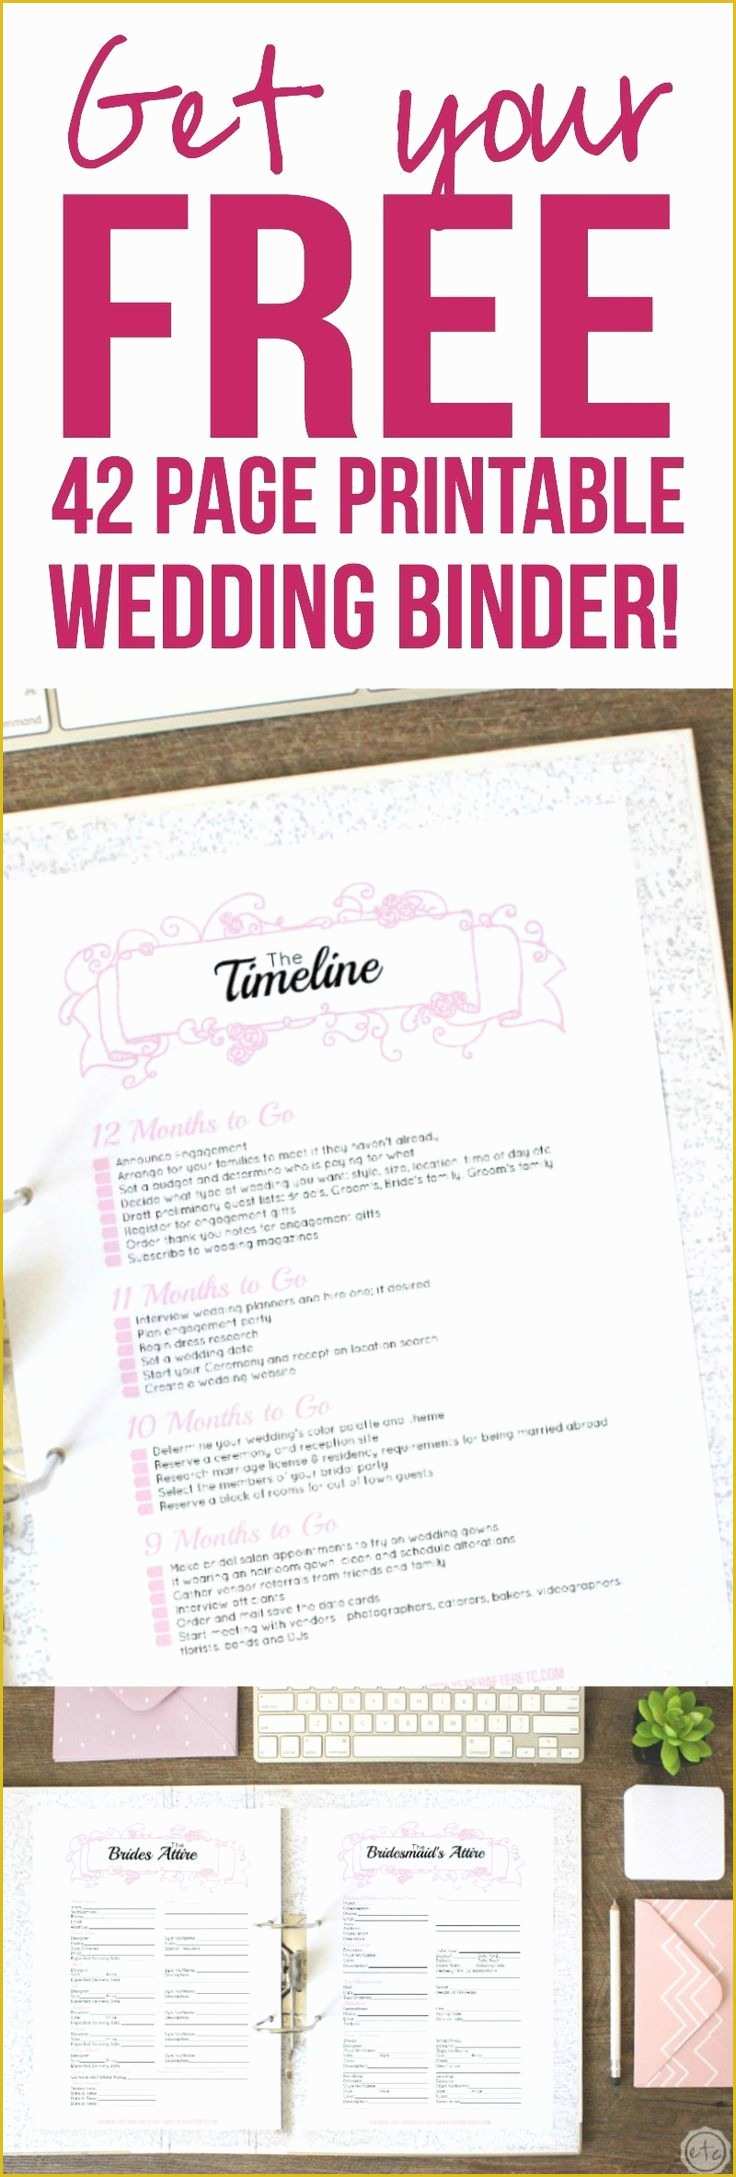 Free Printable Wedding Binder Templates Of 25 Best Ideas About Getting Married On Pinterest